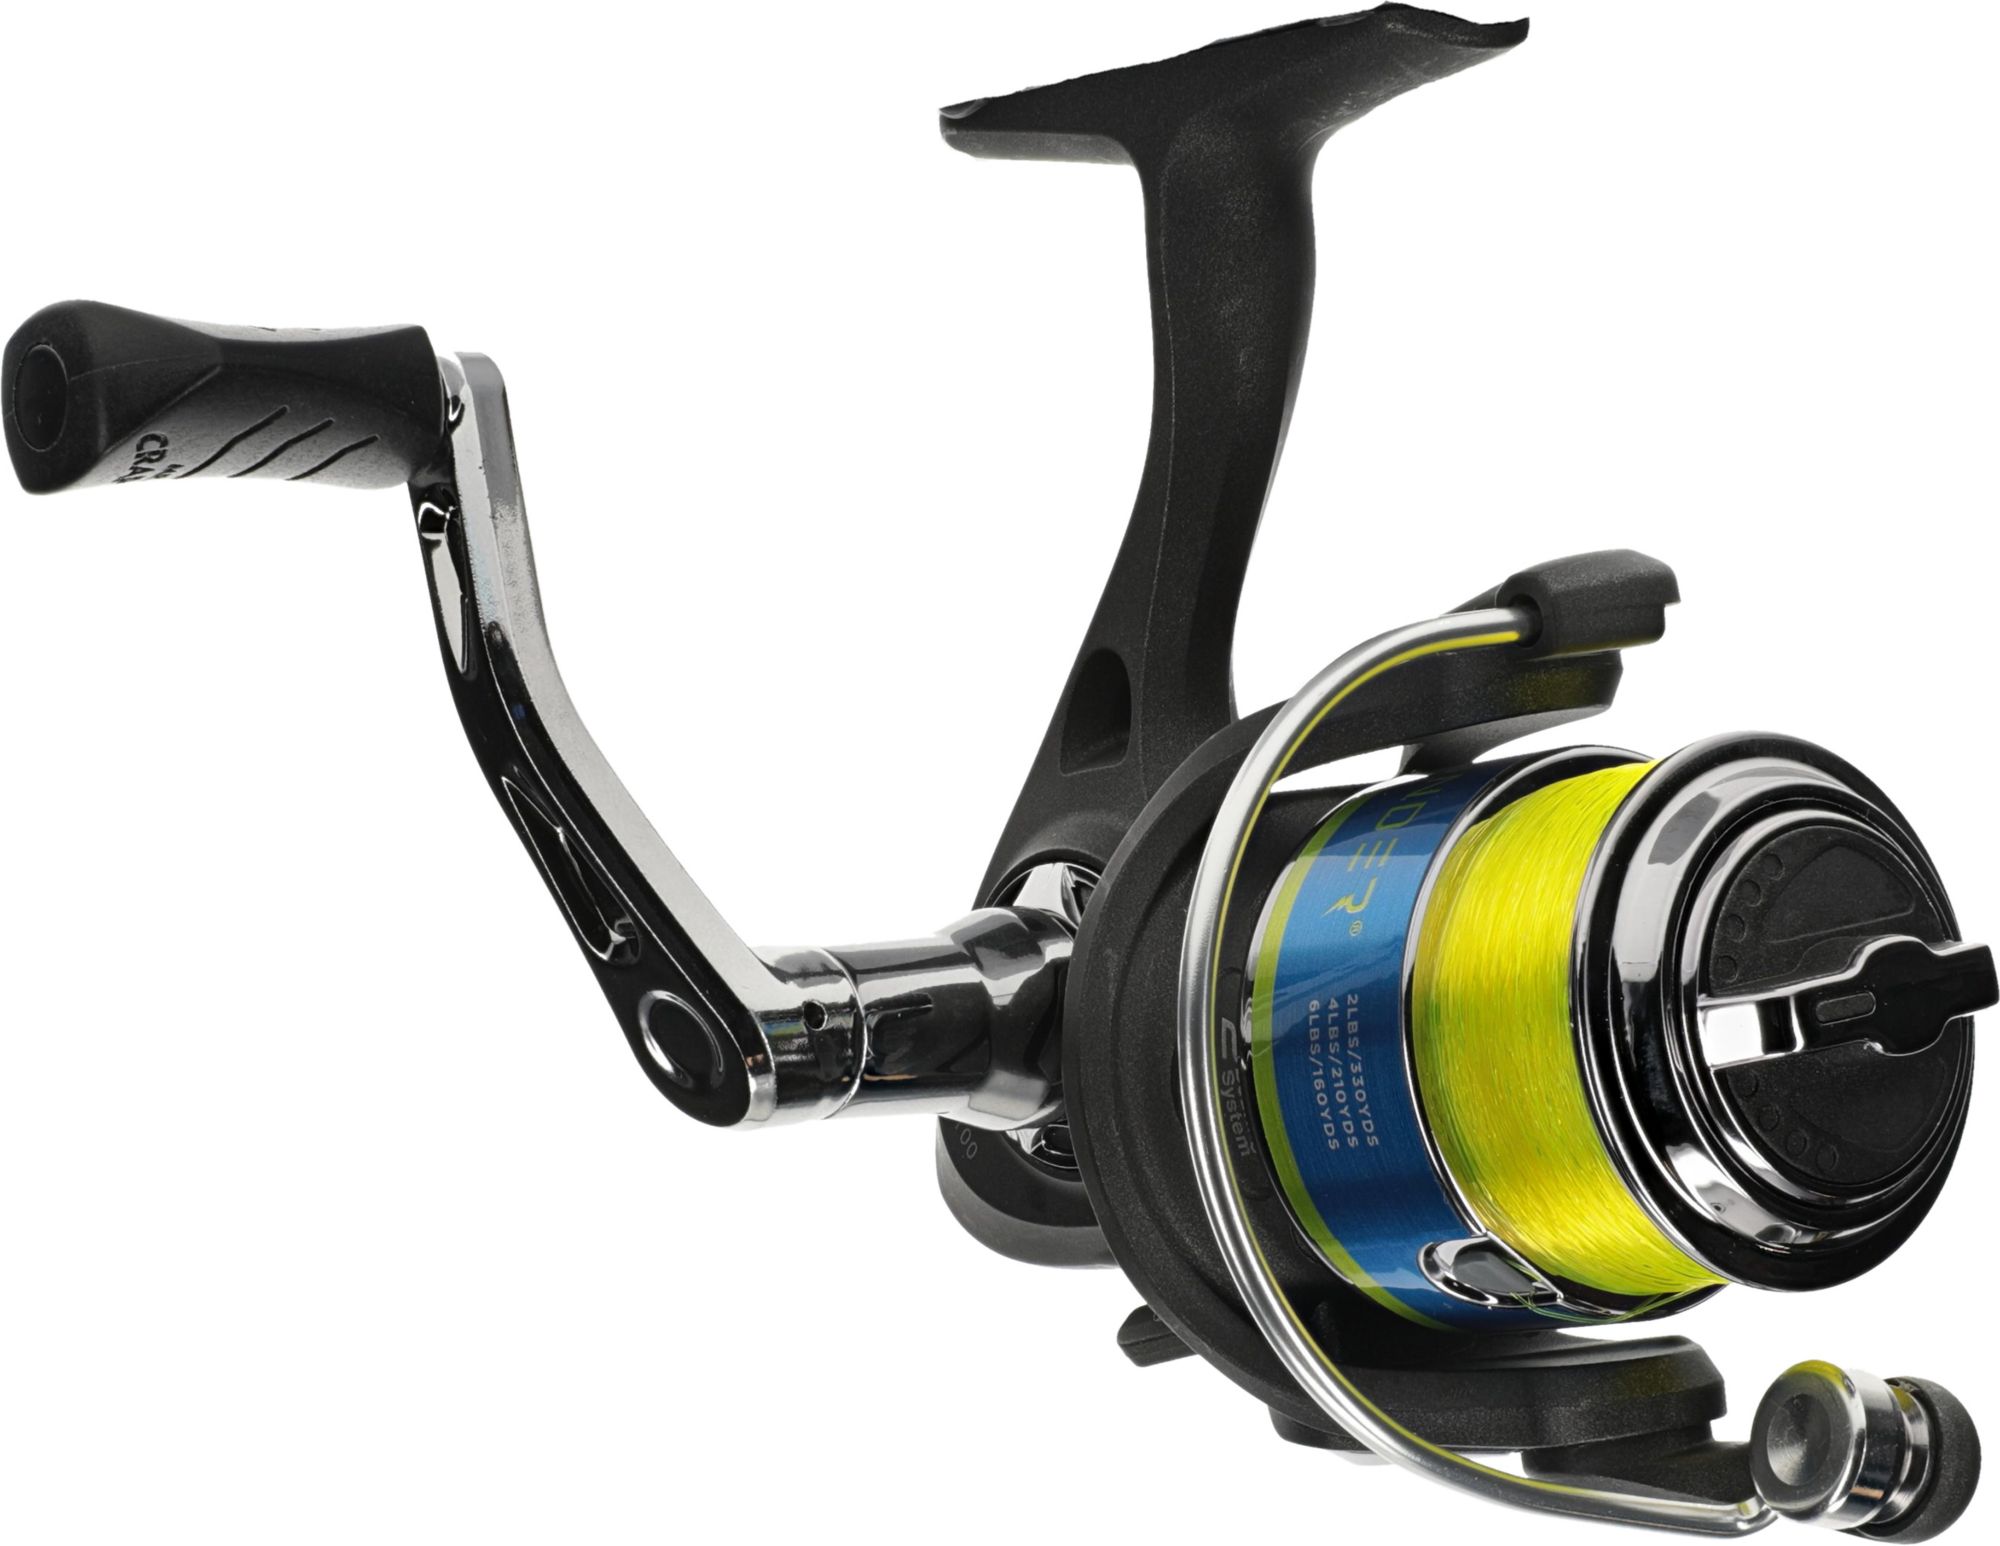 Photos - Other for Fishing Lew's Crappie Thunder Spinning Reel 23LEWU75SZCRPPTHNREE